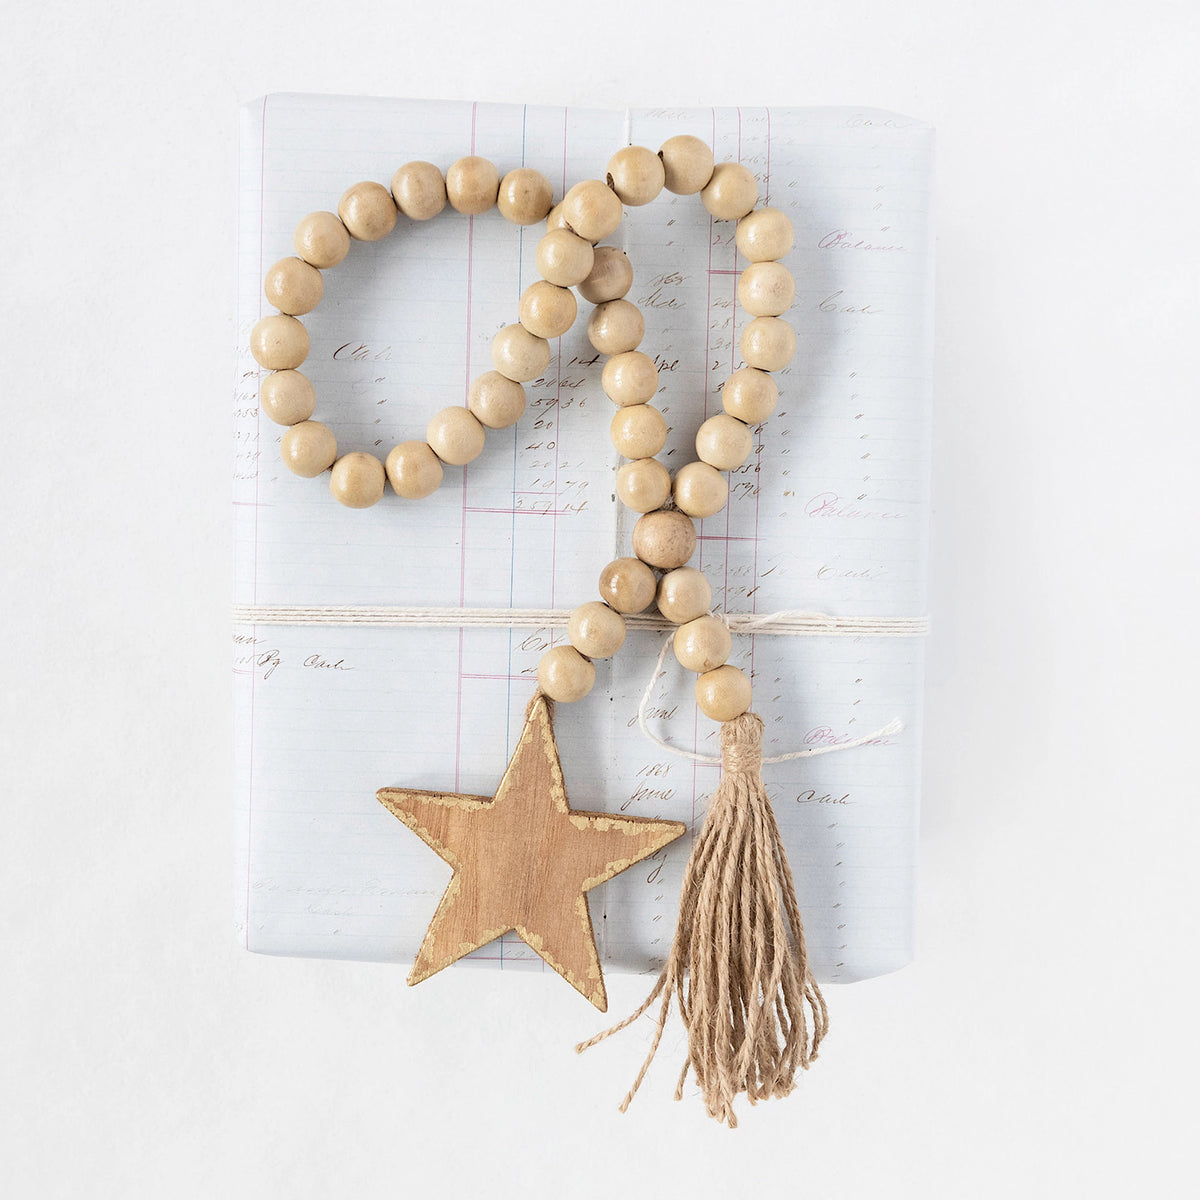 Wood Beads with Star Icon and Jute Tassel